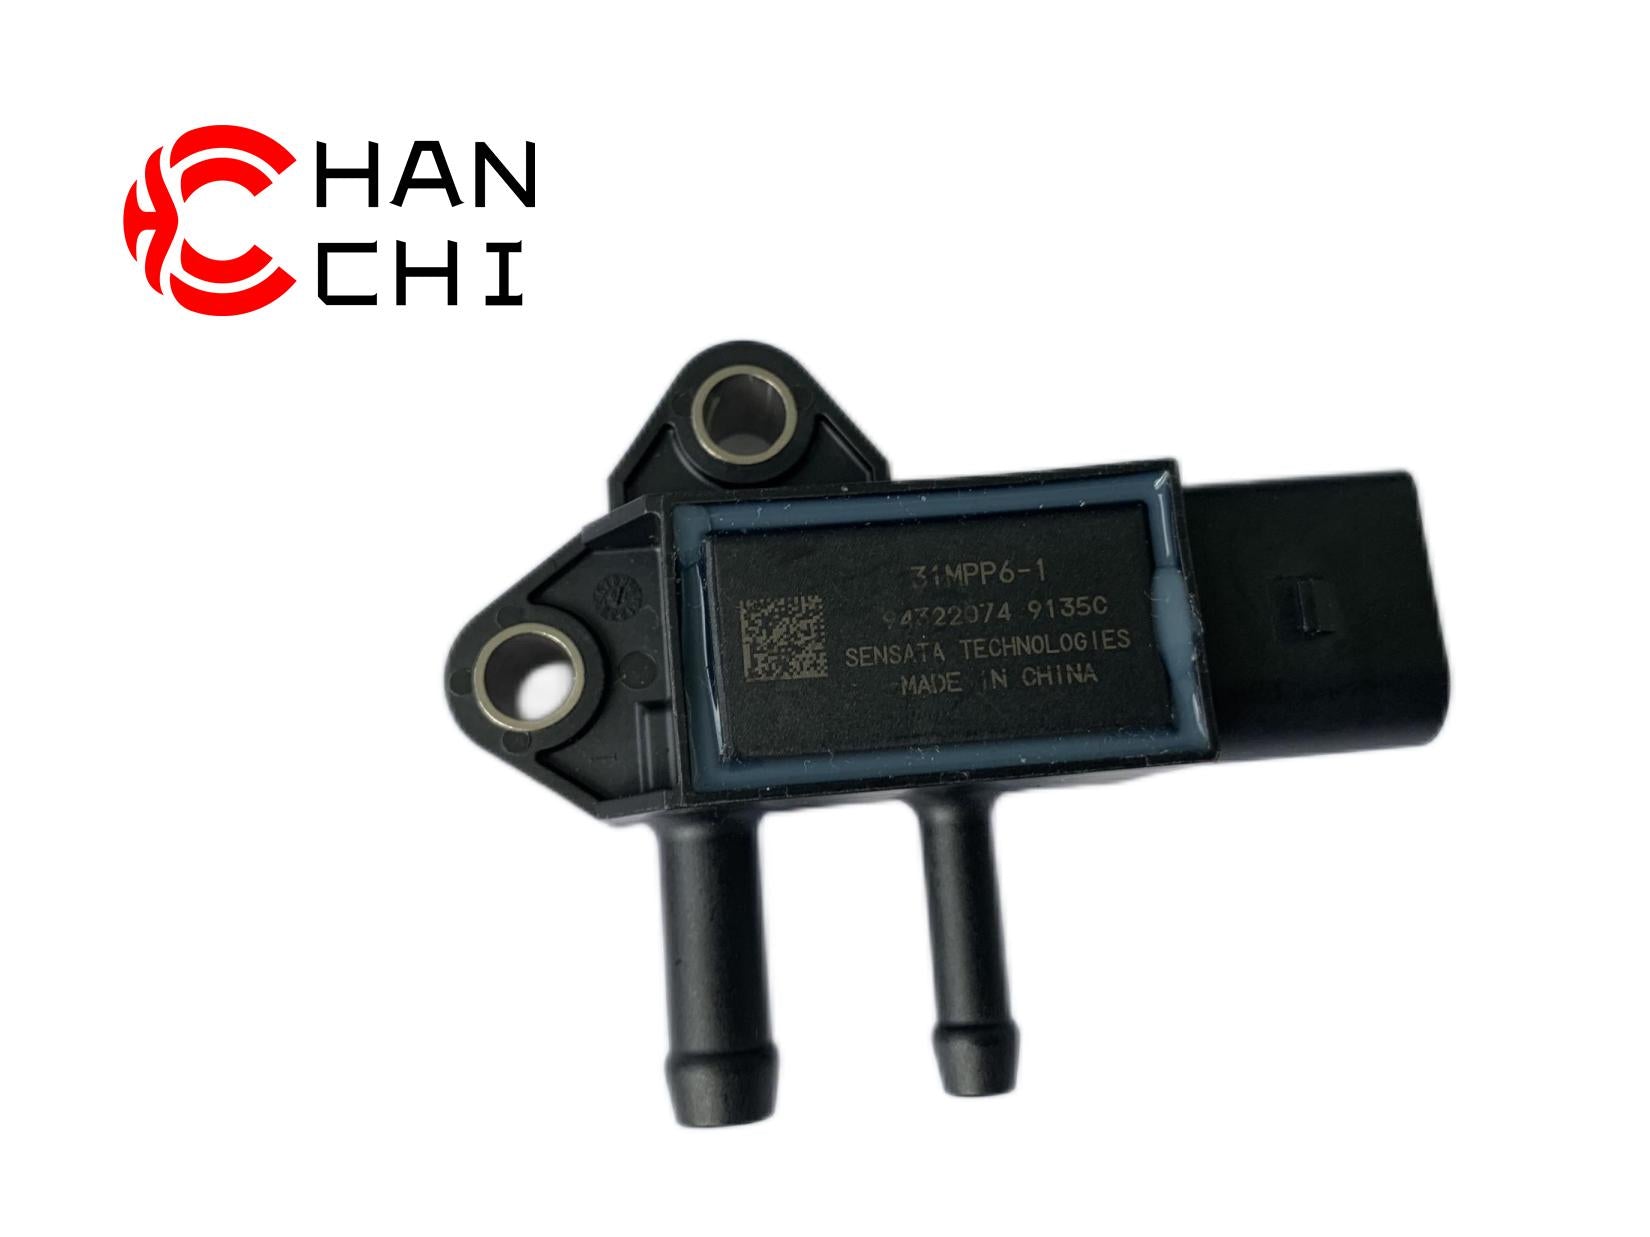 OEM: 31MPP6-1 72559668Material: ABSColor: blackOrigin: Made in ChinaWeight: 100gPacking List: 1* Diesel Particulate Filter Differential Pressure Sensor More ServiceWe can provide OEM Manufacturing serviceWe can Be your one-step solution for Auto PartsWe can provide technical scheme for you Feel Free to Contact Us, We will get back to you as soon as possible.